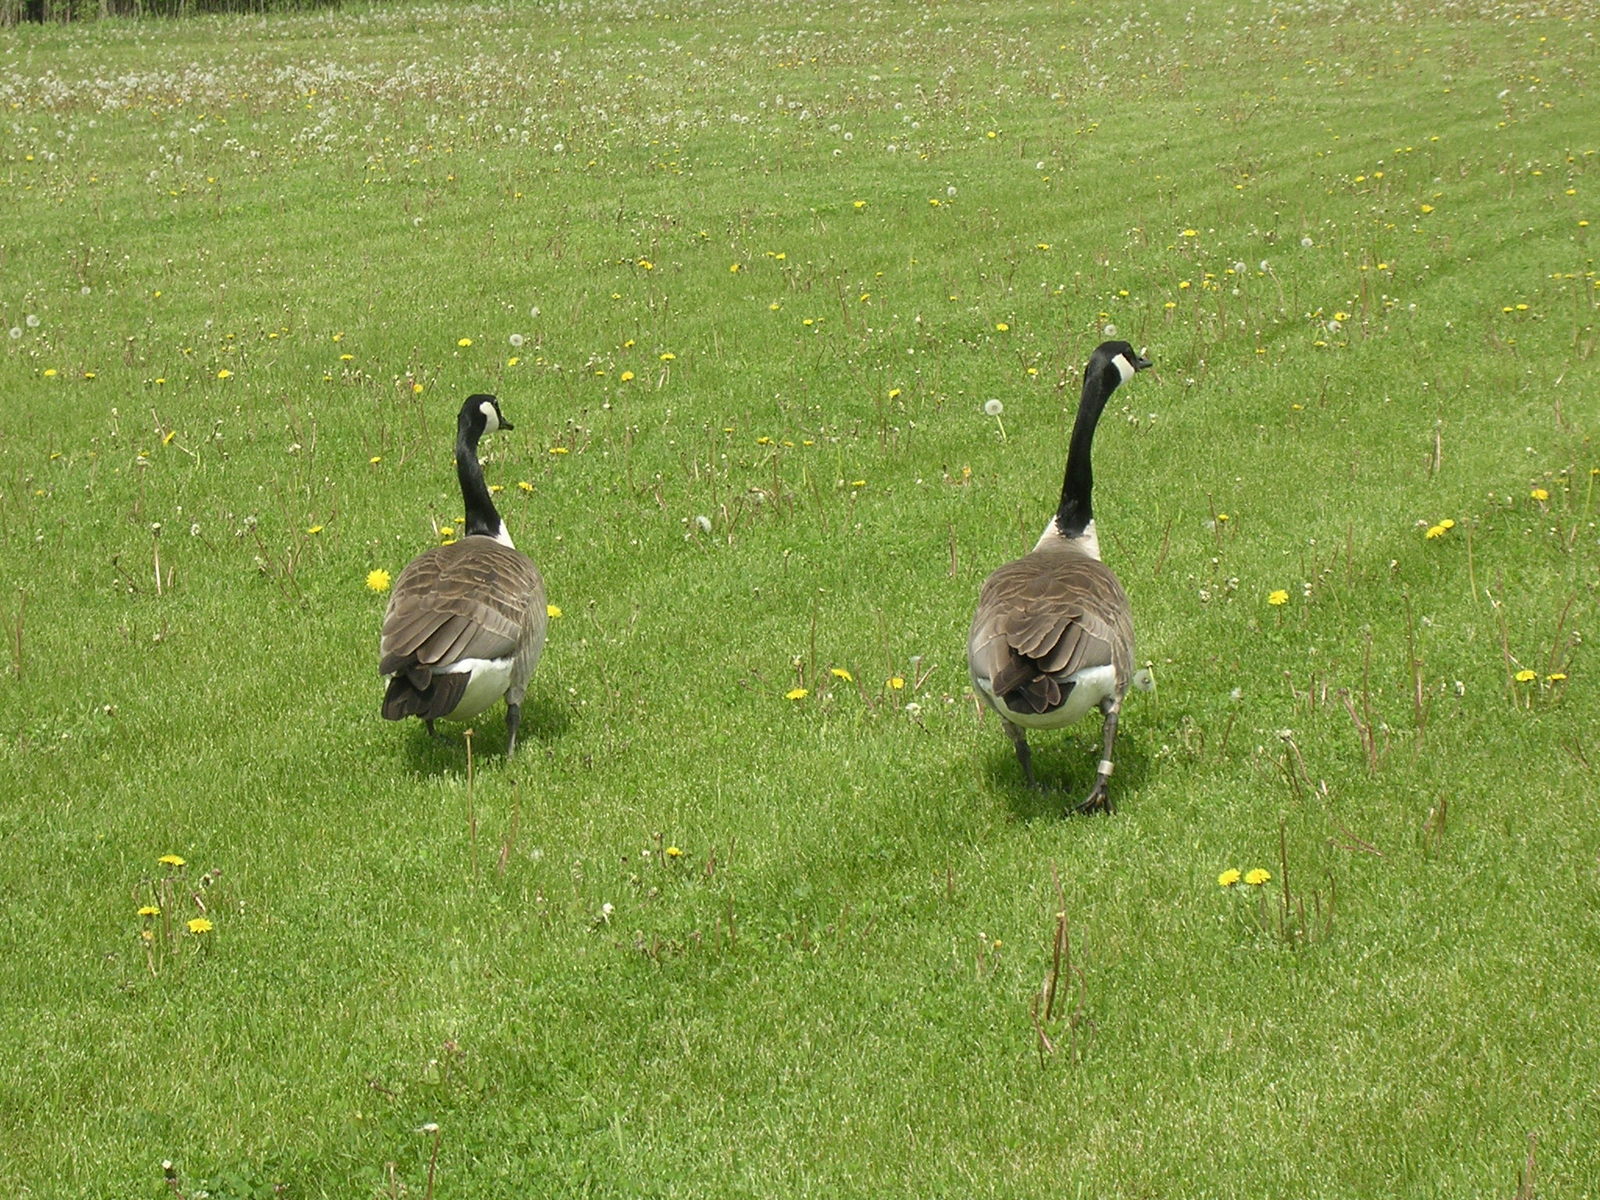 two geese are walking in the green grass